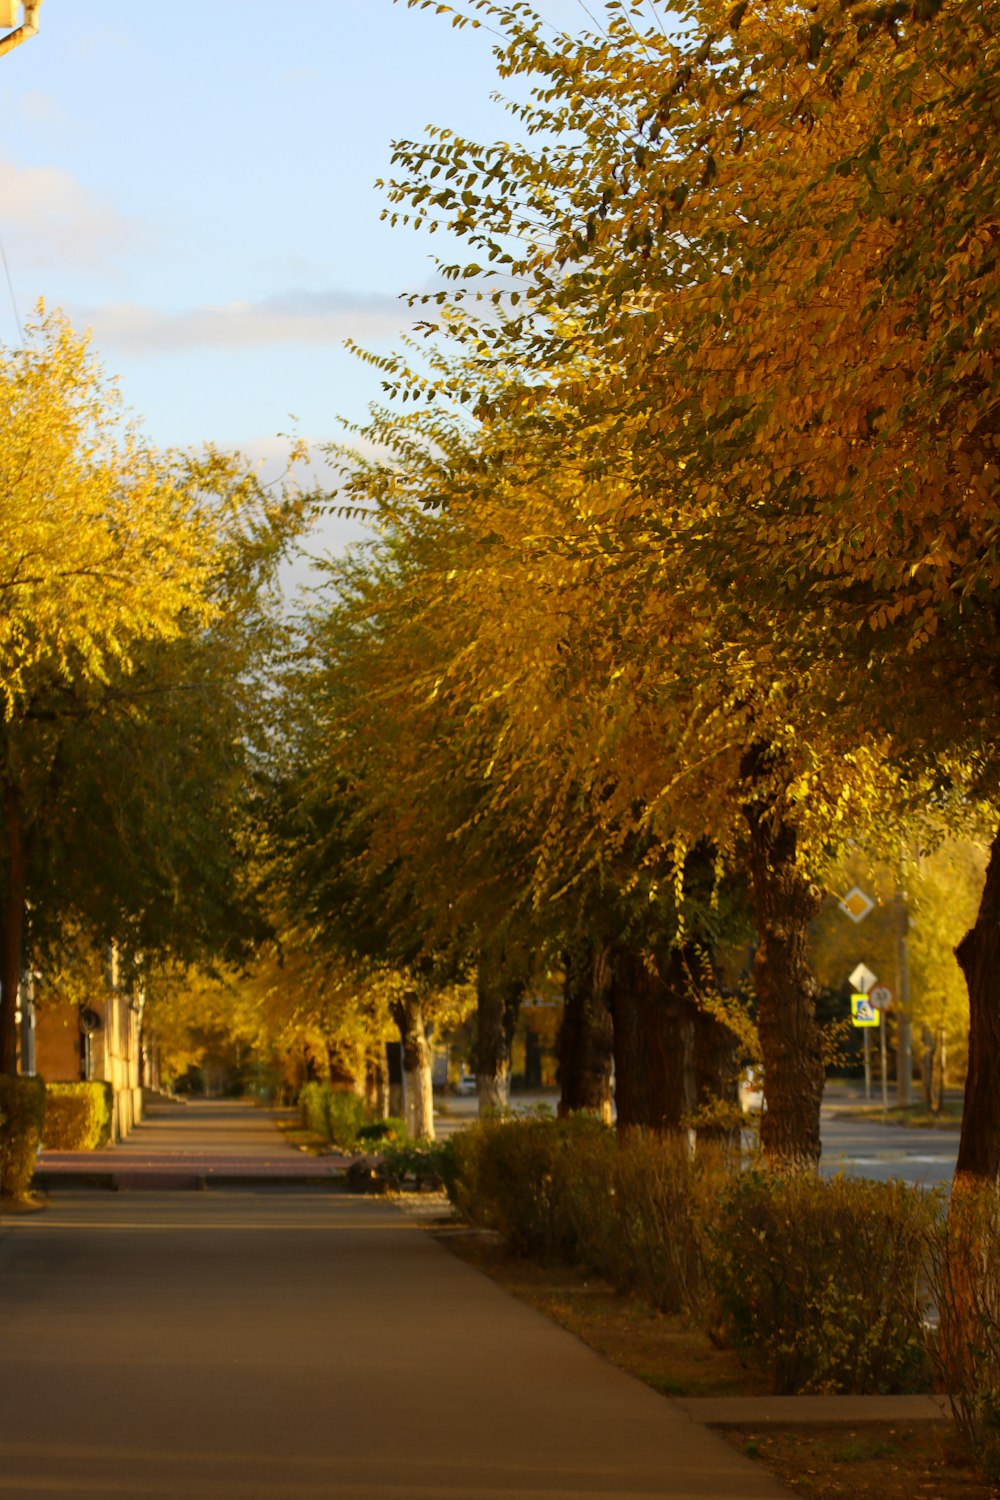 a street lined with lots of trees with yellow leaves